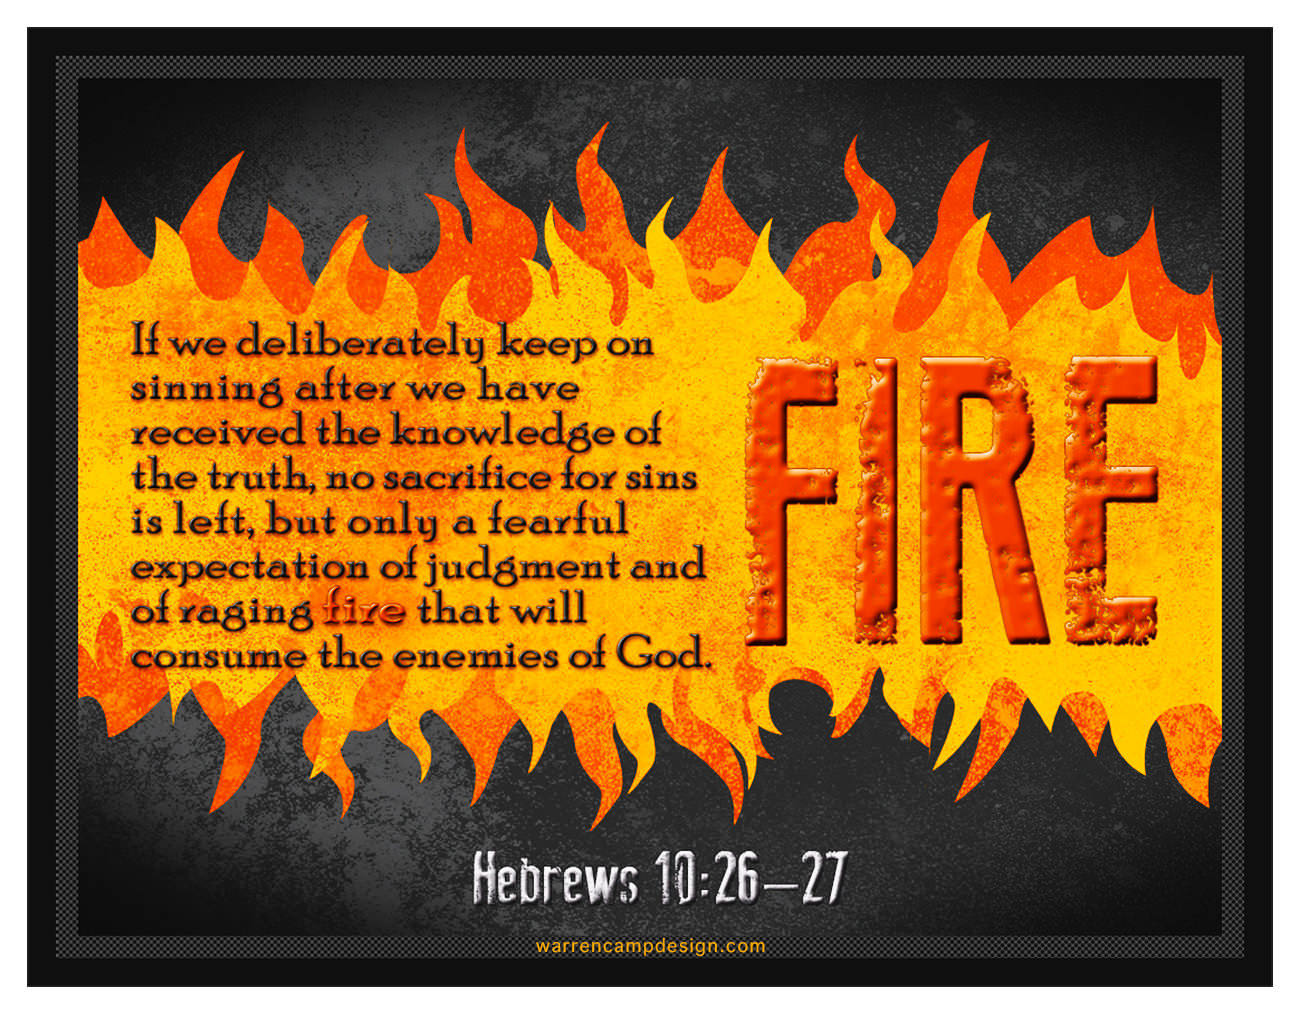 Scripture picture of Hebrews 10:26-27, emphasizing the fearful expectation of judgment and of raging fire that will consume the enemies of God.